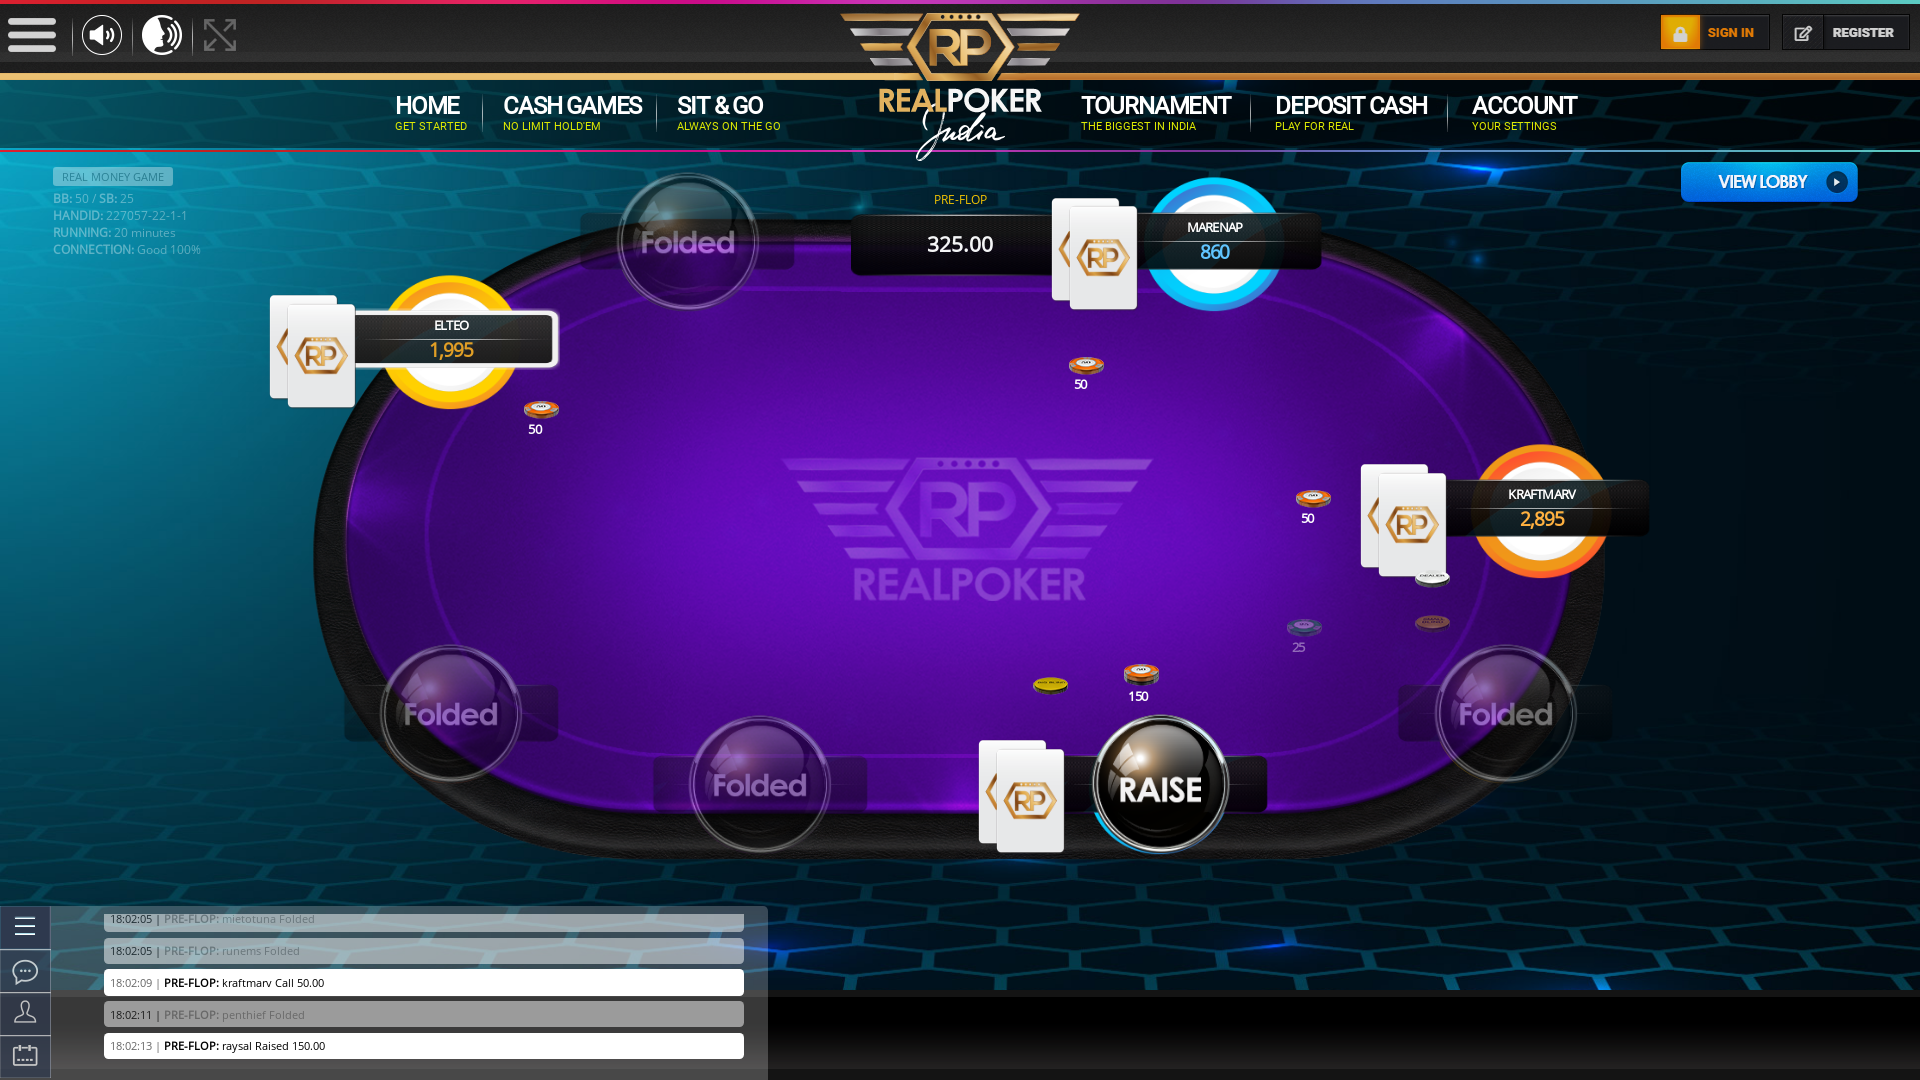 Real poker on a 10 player table in the 20th minute of the game